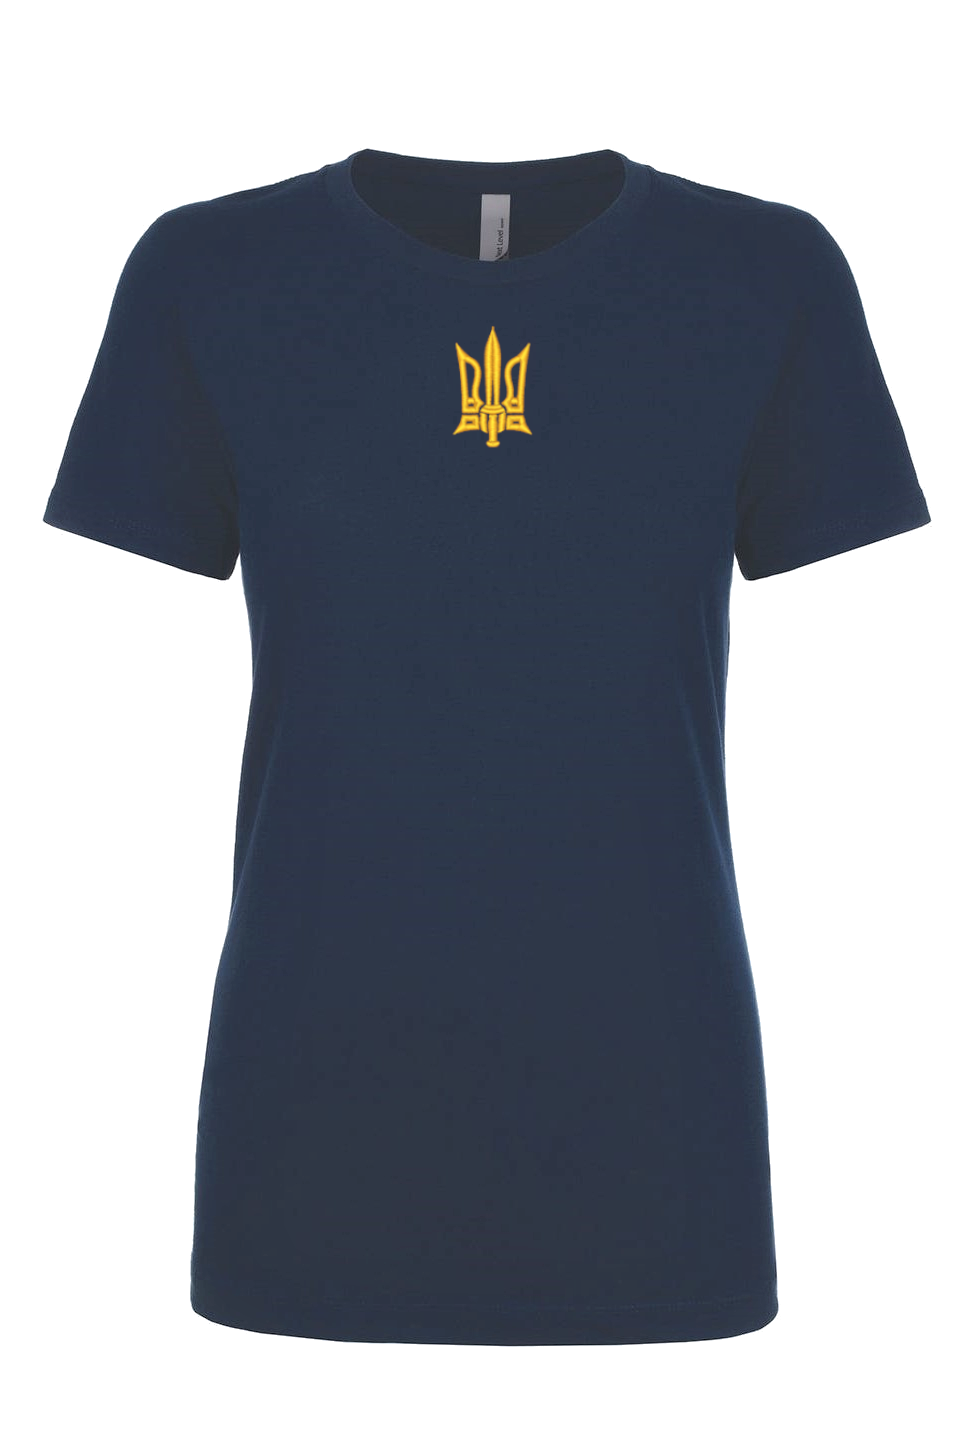 Female fit embroidered t-shirt "Tryzub"